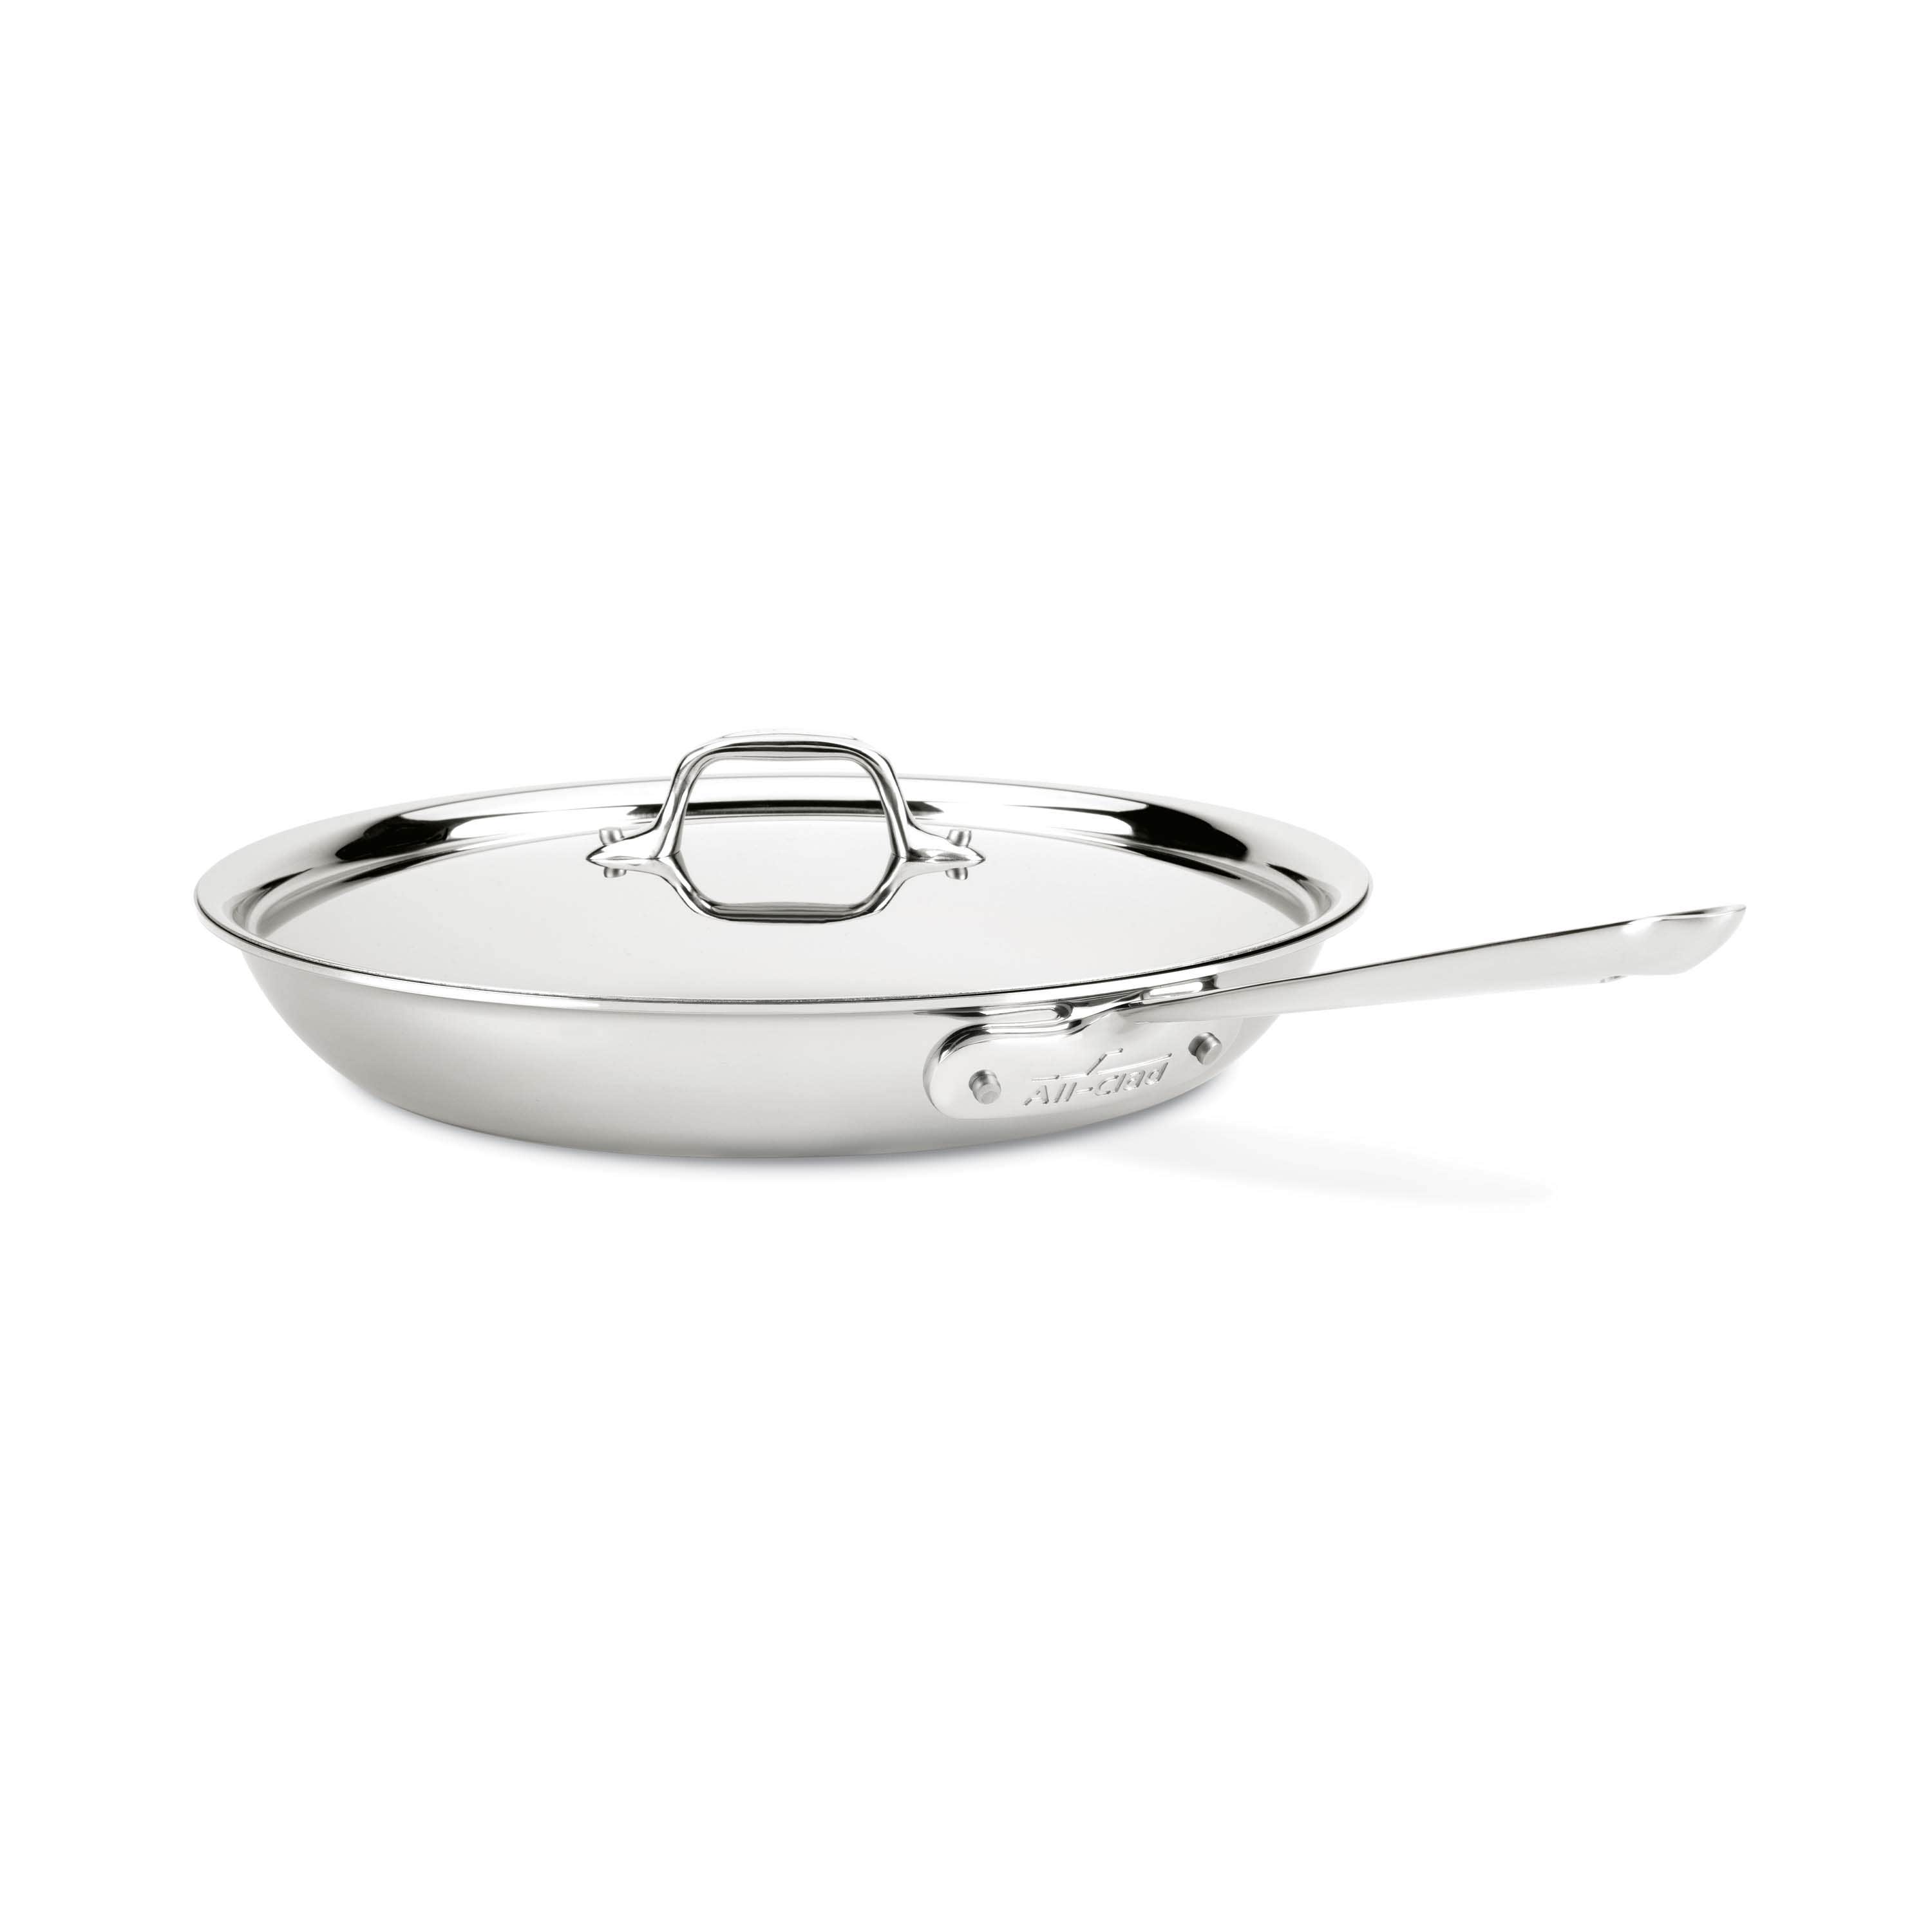 12" All-Clad D3 Stainless Steel 3-Ply Frying Pan w/ Lid $84.96